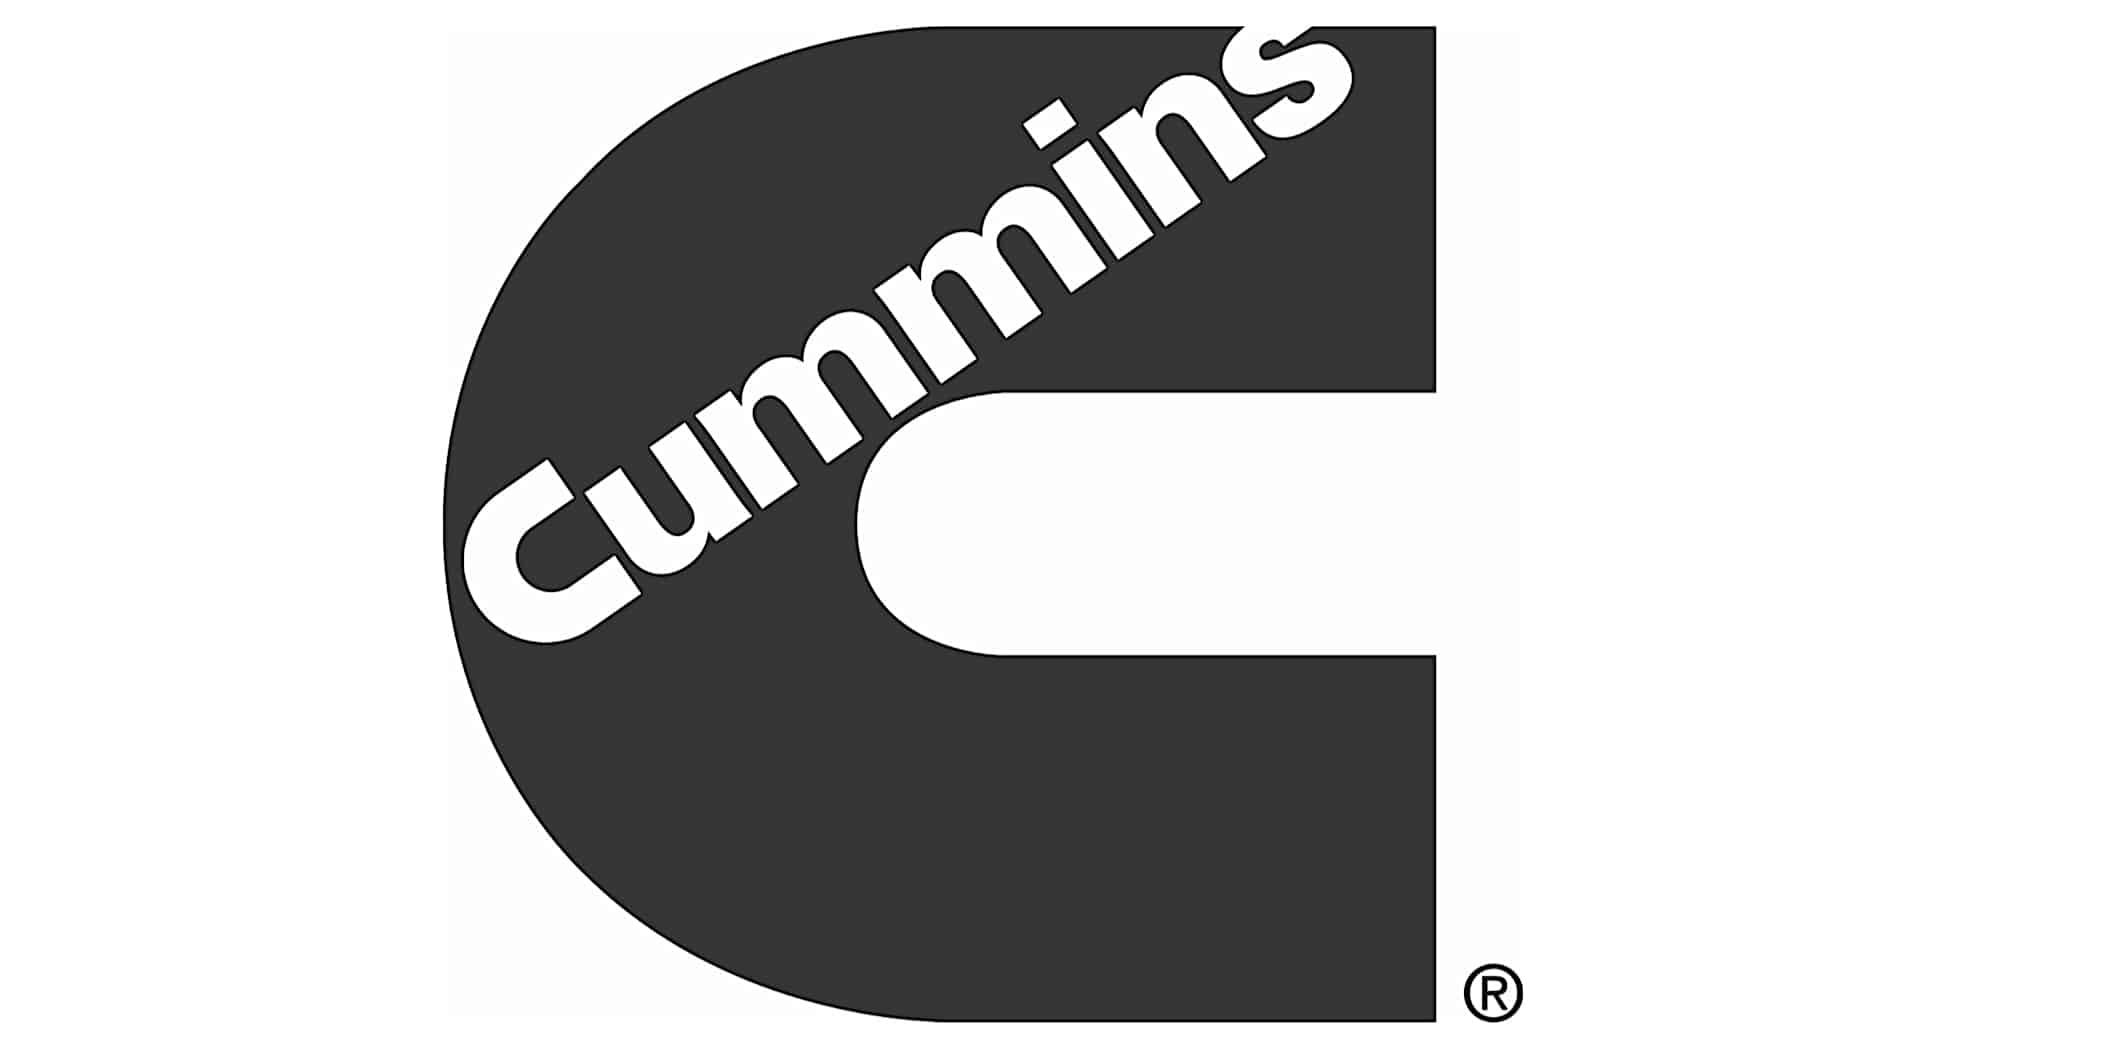 Cummins and Heliox to Partner on Electric Vehicle Charging Solutions